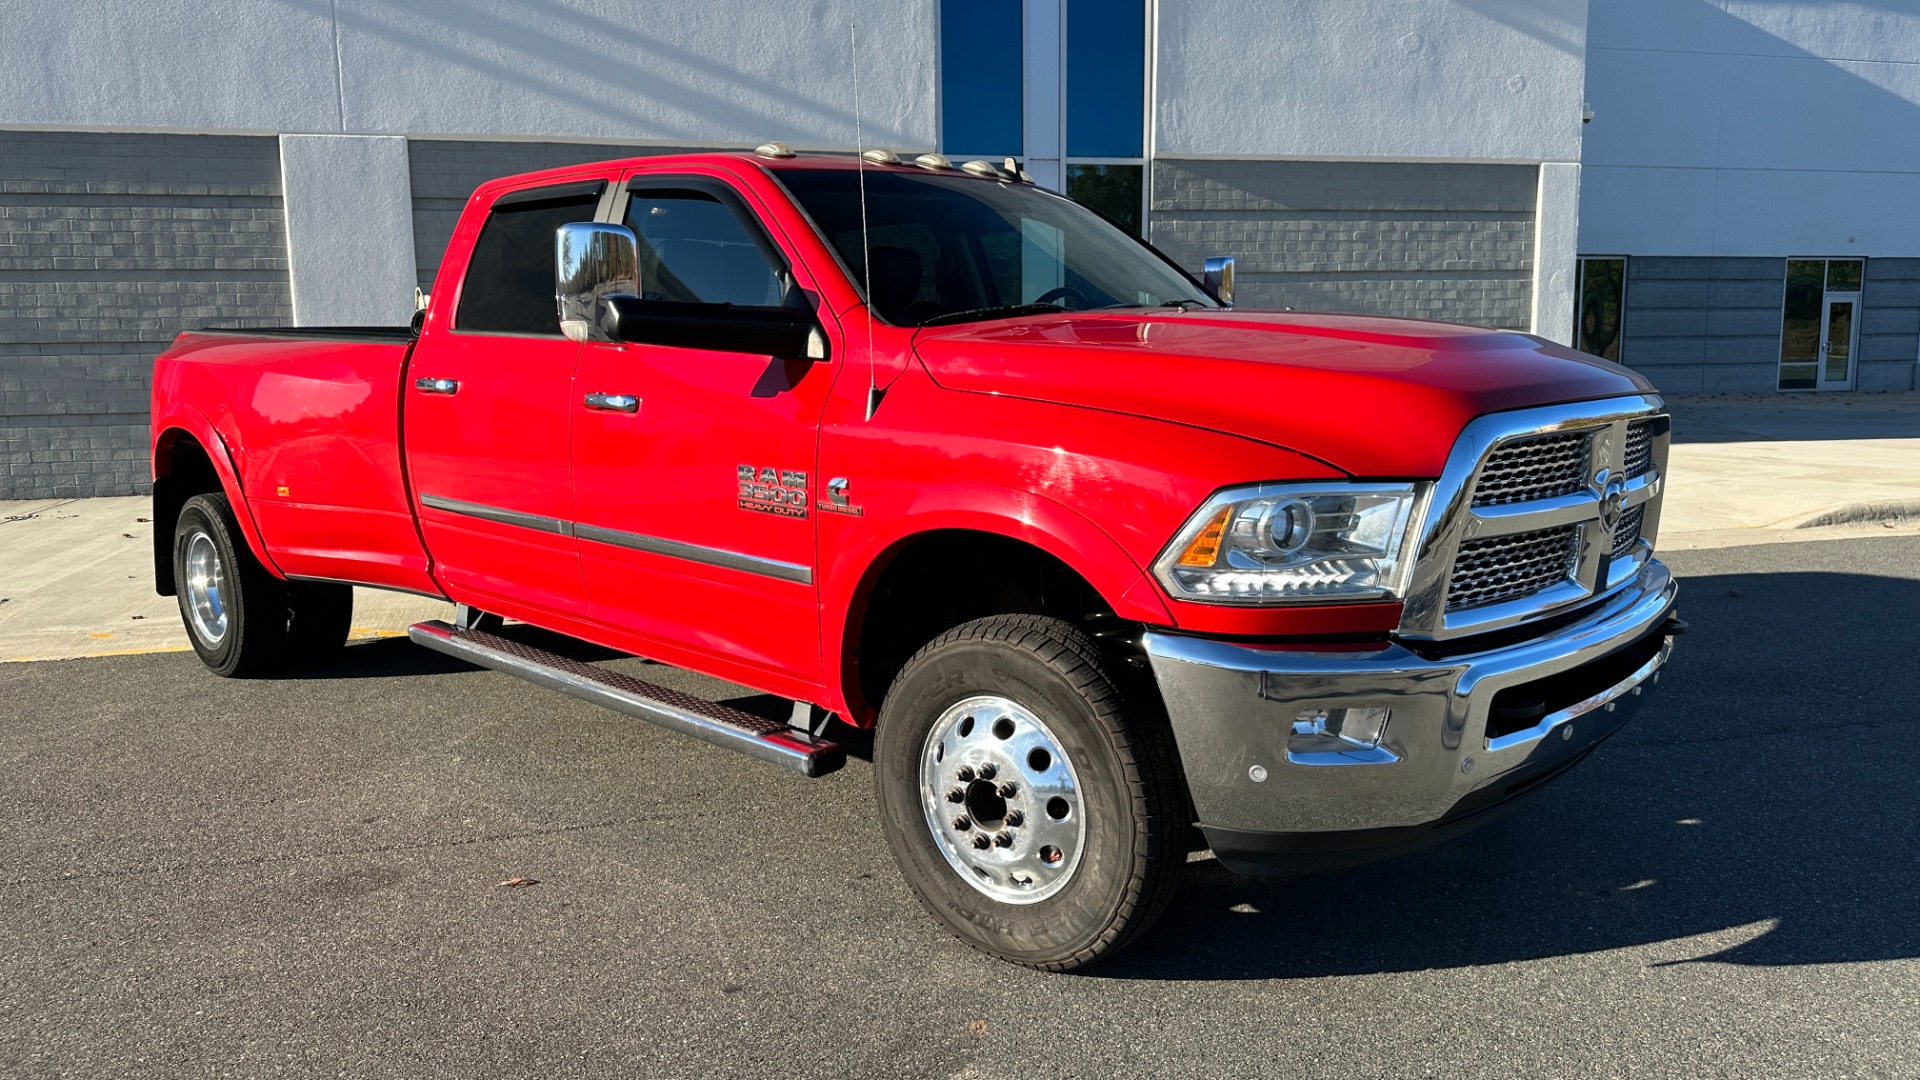 Used 2017 Ram 3500 LARAMIE / TURBO DIESEL / AISIN TRANSMISSION / DUAL REAR WHEELS / 4X4 / CREW for sale $45,995 at Formula Imports in Charlotte NC 28227 9